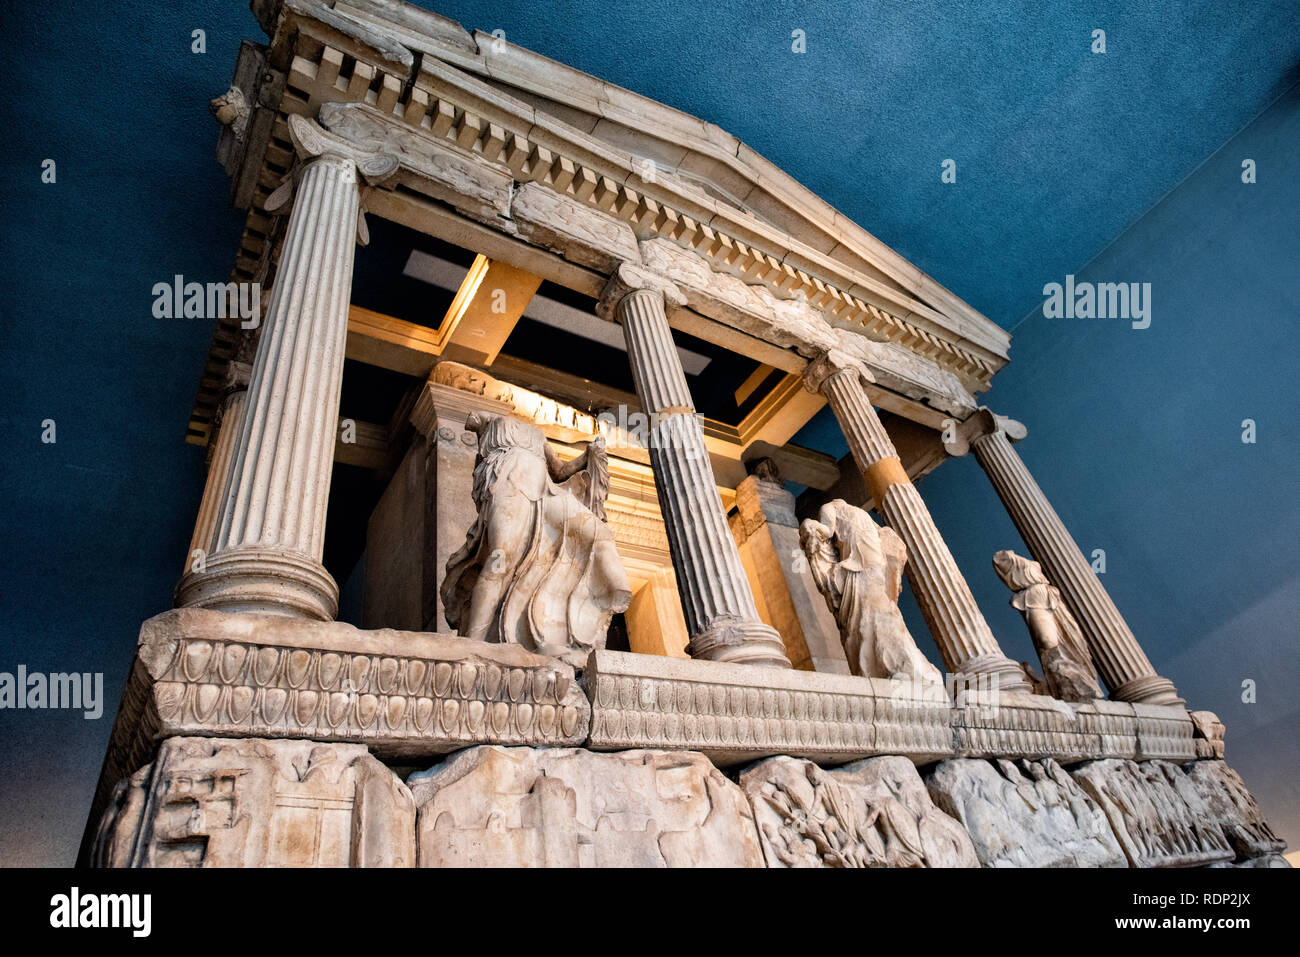 LONDON, UK - The Nereid Monument, the largest and finest of teh Lykian tombs found near Xanthos in southwestern Turkey. It is named after the figures of Nereids, the daughters of the sea god Nereus, which are placed between the columns. It was built around 390-380 BC. The British Museum, in London, is one of the largest and most comprehensive of the world's museums. It is dedicated to human history, art, and culture, and was established in 1753. The British Museum in London houses a vast collection of world art and artifacts, reflecting human history, culture, and civilizations from around the Stock Photo